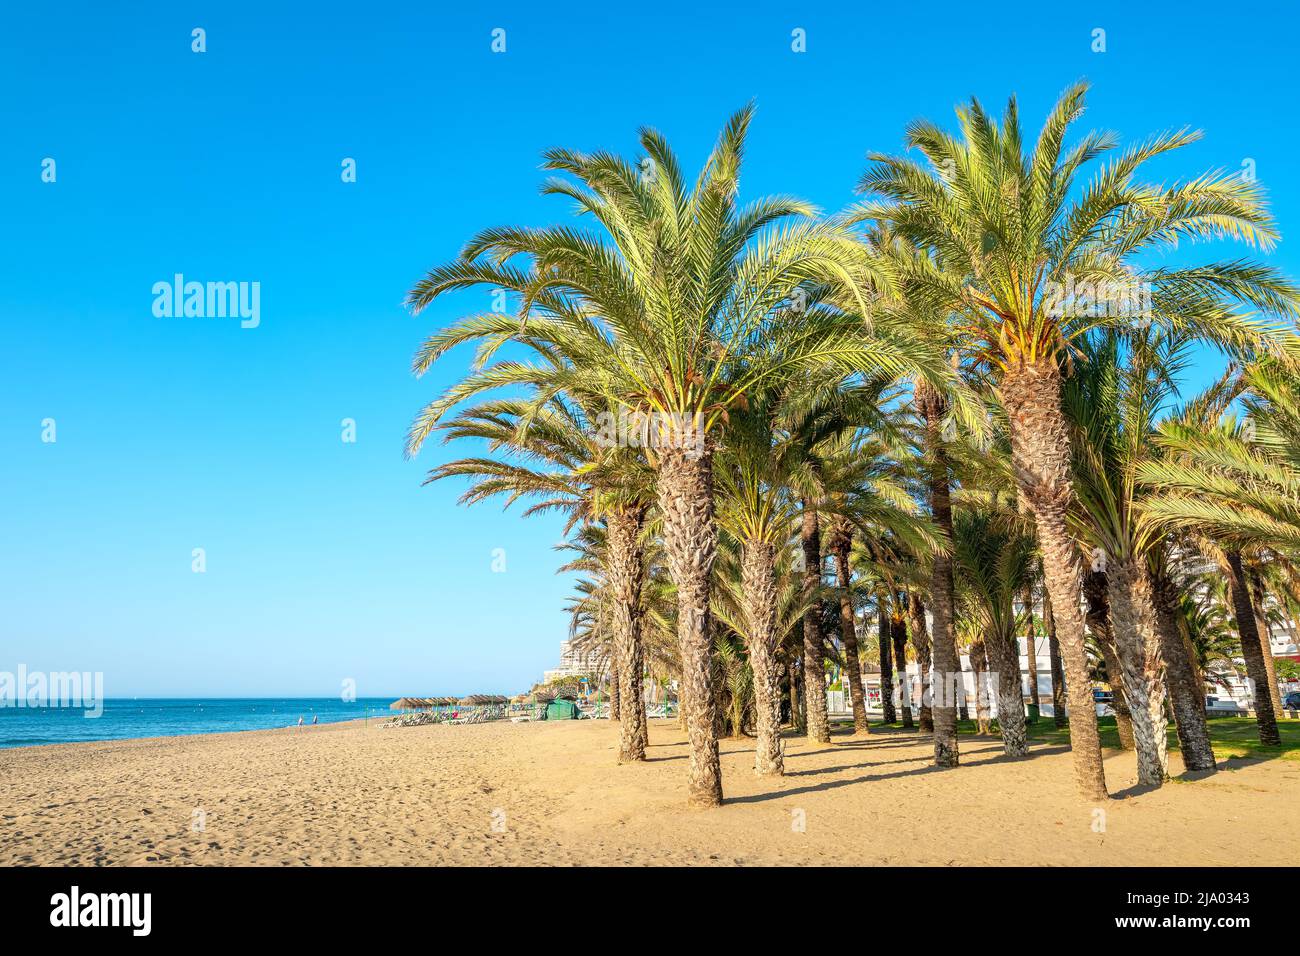 Palm grove along the beach in Torremolinos. Costa del Sol, Andalusia, Spain Stock Photo